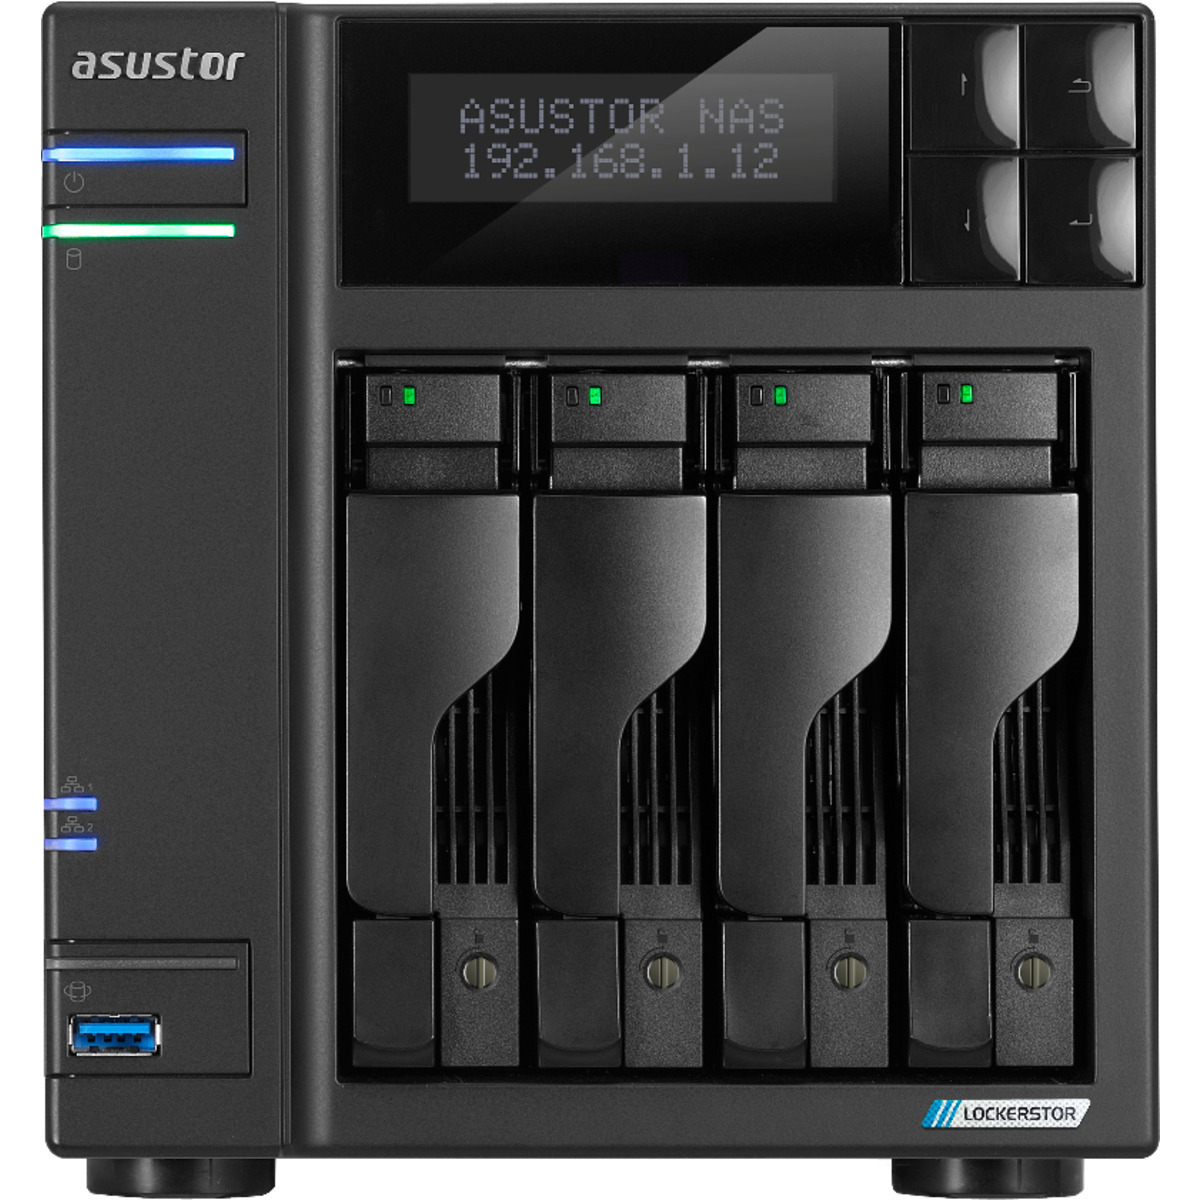 ASUSTOR LOCKERSTOR 4 Gen2 AS6704T 48tb 4-Bay Desktop Multimedia / Power User / Business NAS - Network Attached Storage Device 4x12tb Seagate EXOS X18 ST12000NM000J 3.5 7200rpm SATA 6Gb/s HDD ENTERPRISE Class Drives Installed - Burn-In Tested - FREE RAM UPGRADE LOCKERSTOR 4 Gen2 AS6704T